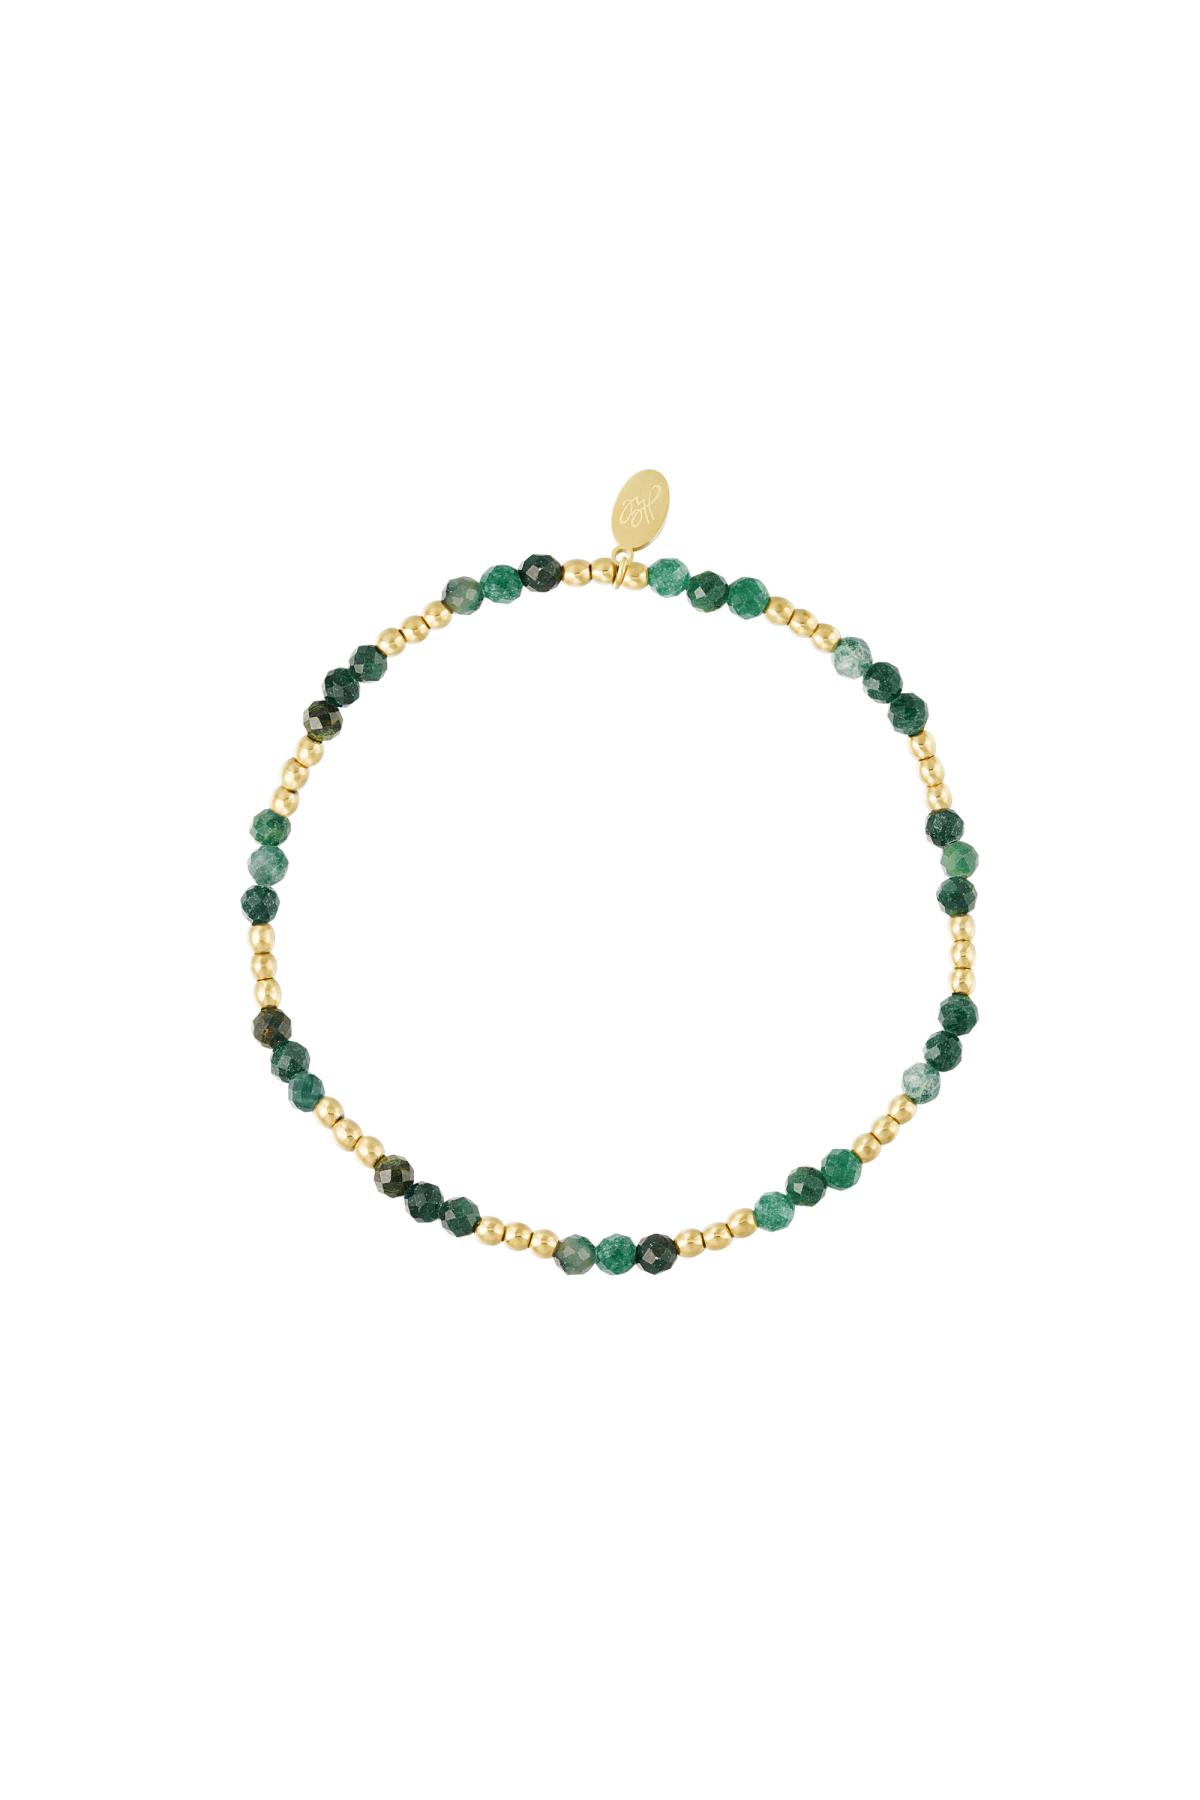 Beaded bracelet colorful - Natural stones collection Green & Gold Stainless Steel 